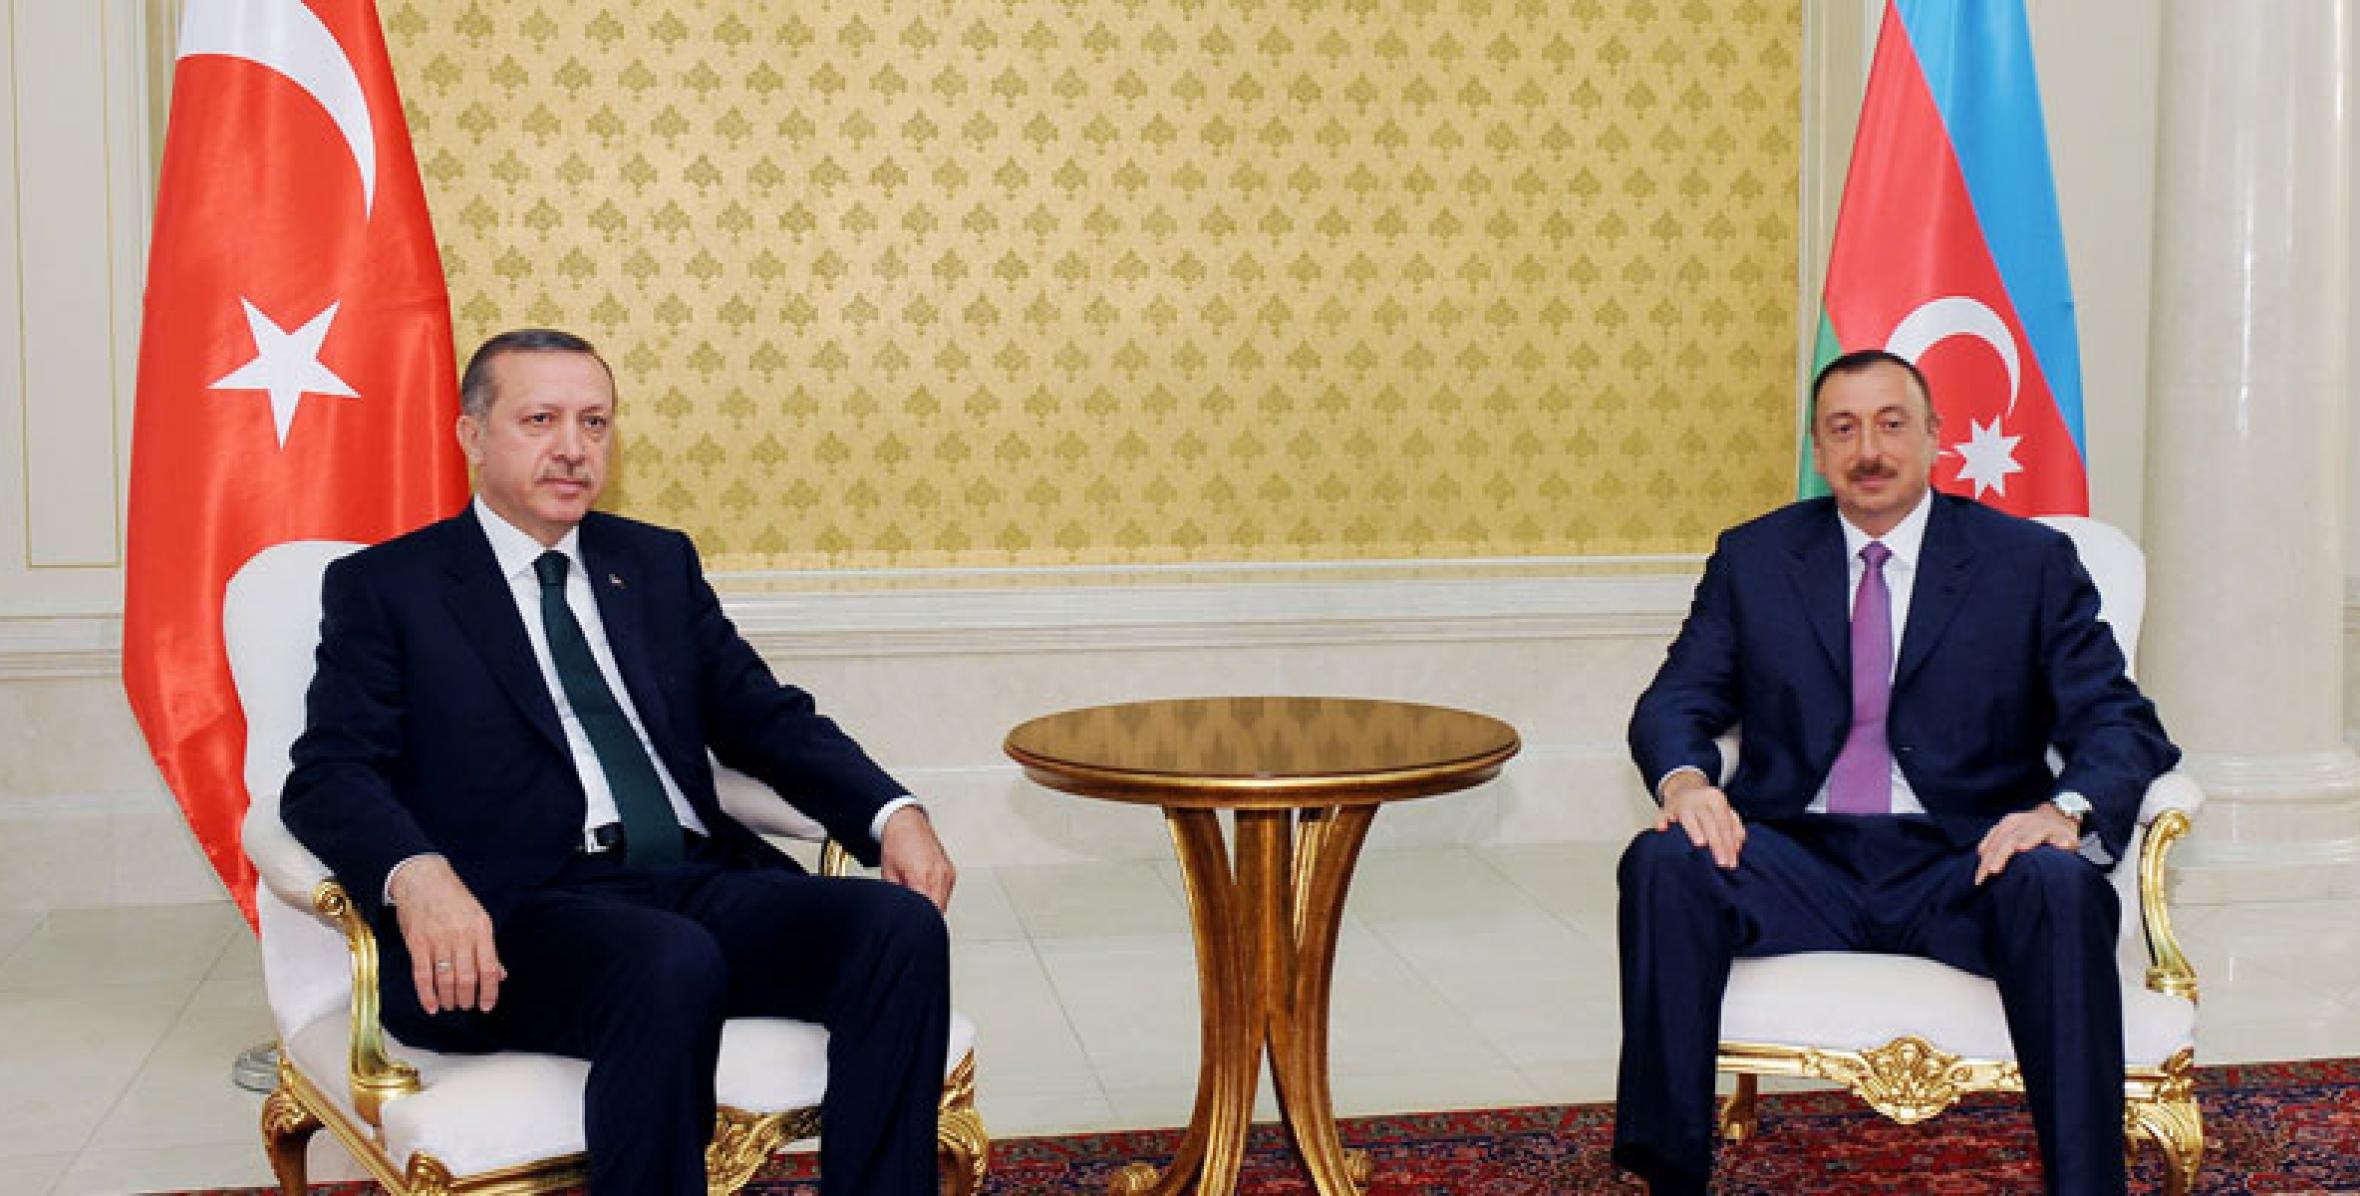 Ilham Aliyev and Turkish Prime Minister Recep Tayyip Erdogan held a meeting in private